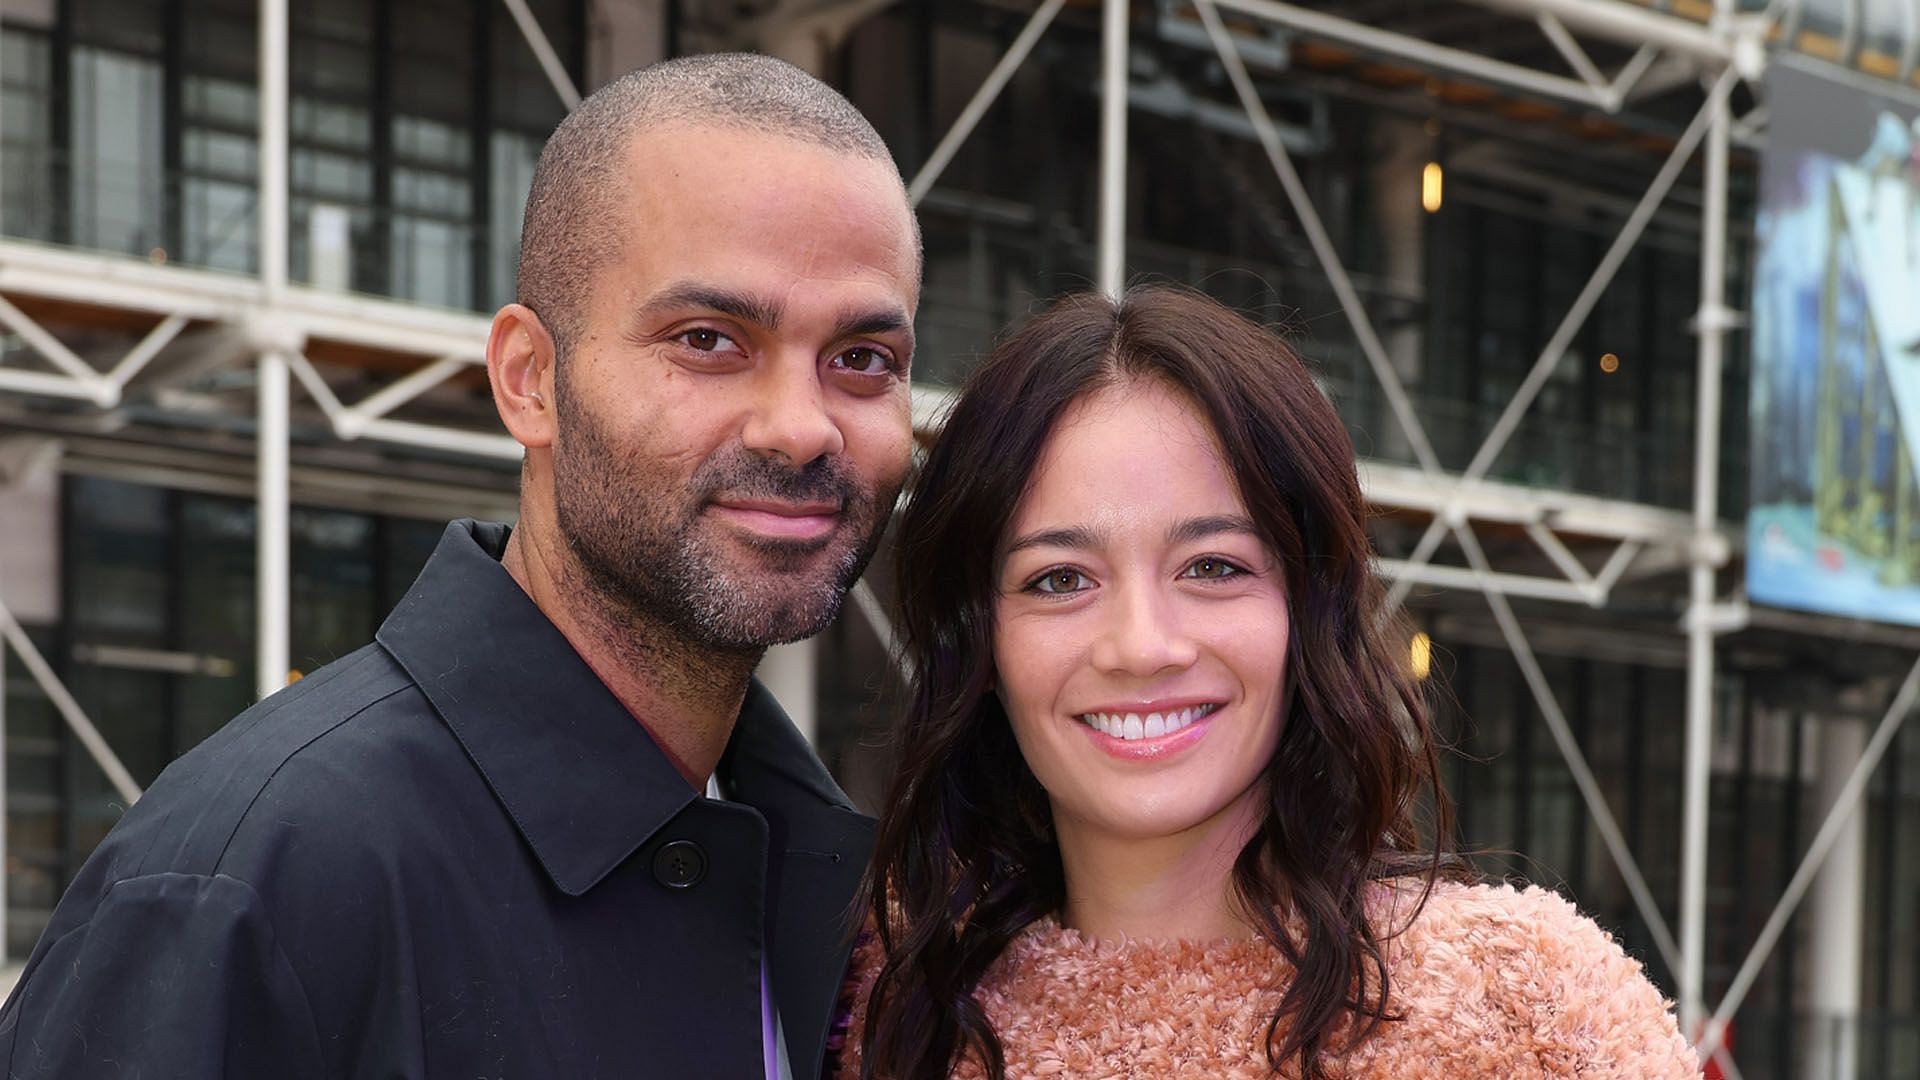 Tony Parker Marries Axelle Francine